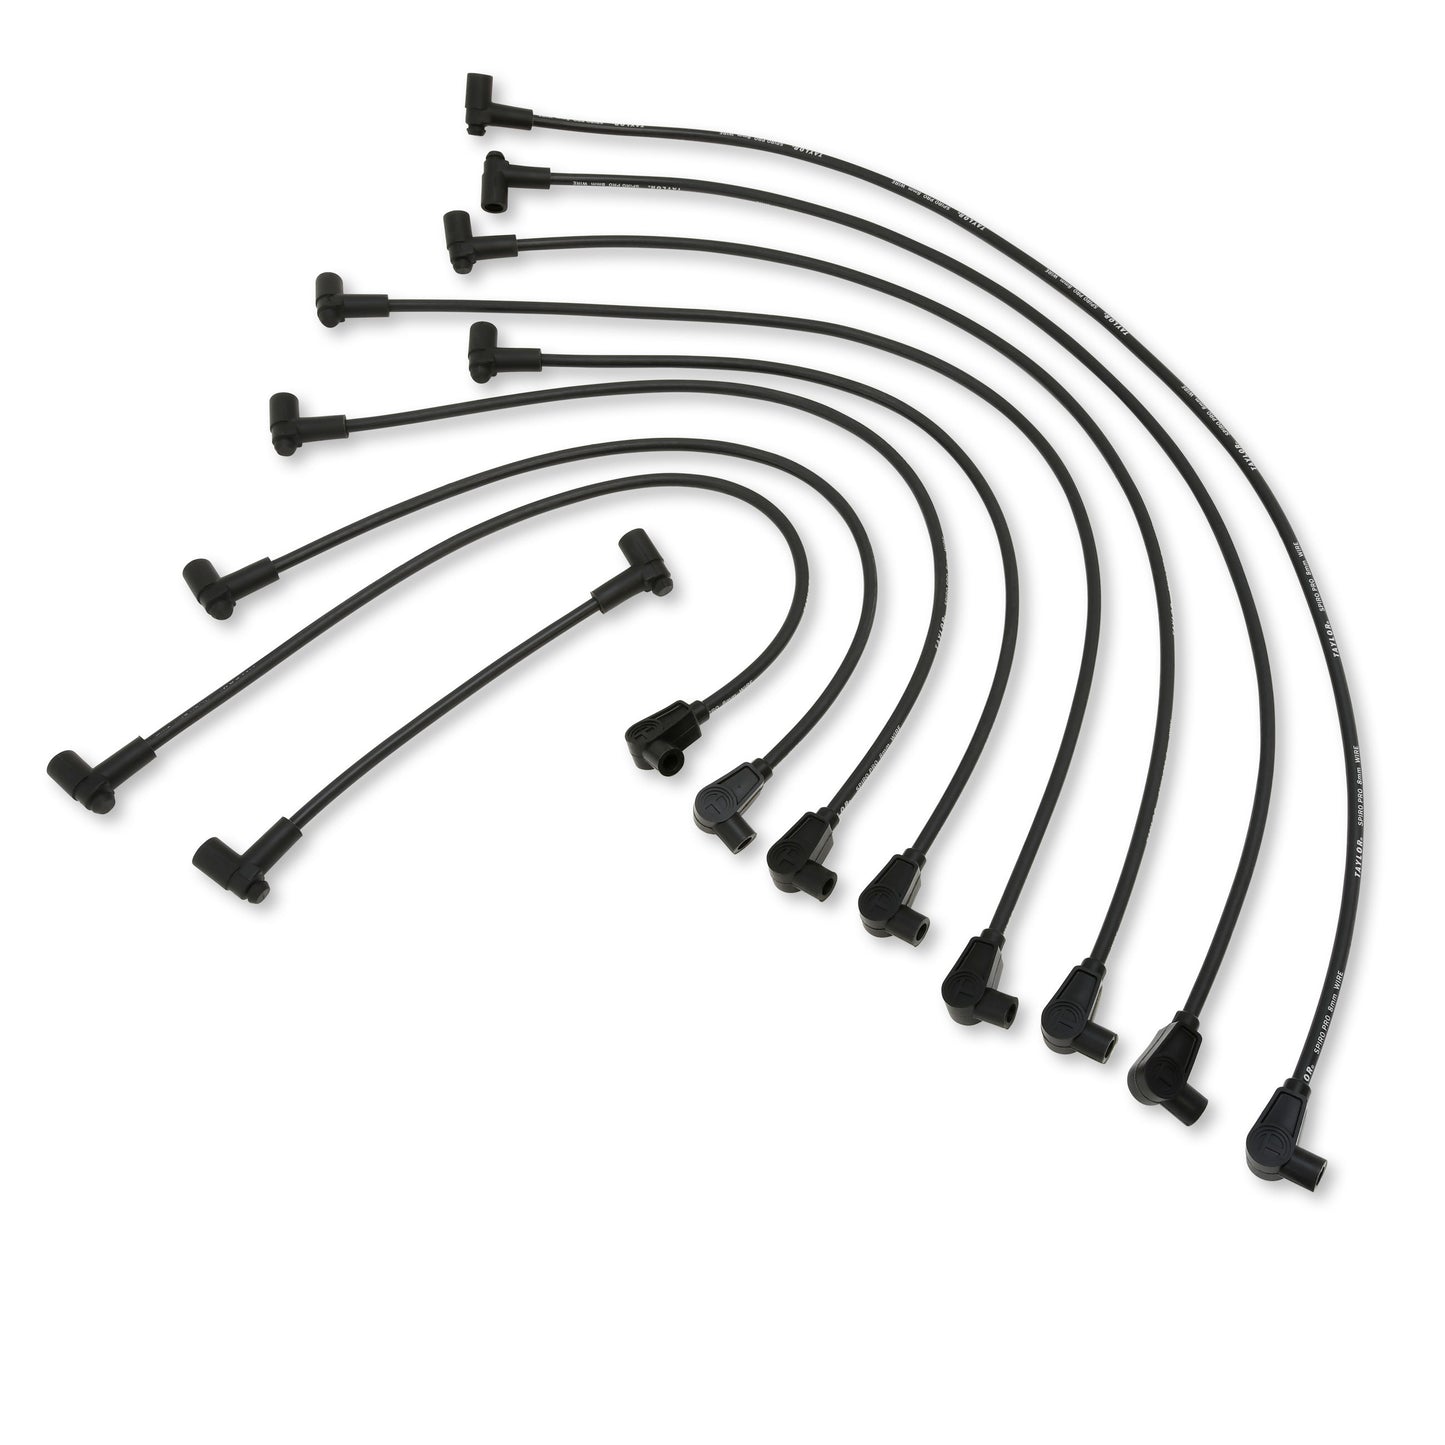 Taylor Cable 74002 8mm Spiro-Pro Custom Spark Plug Wires 8 cyl black